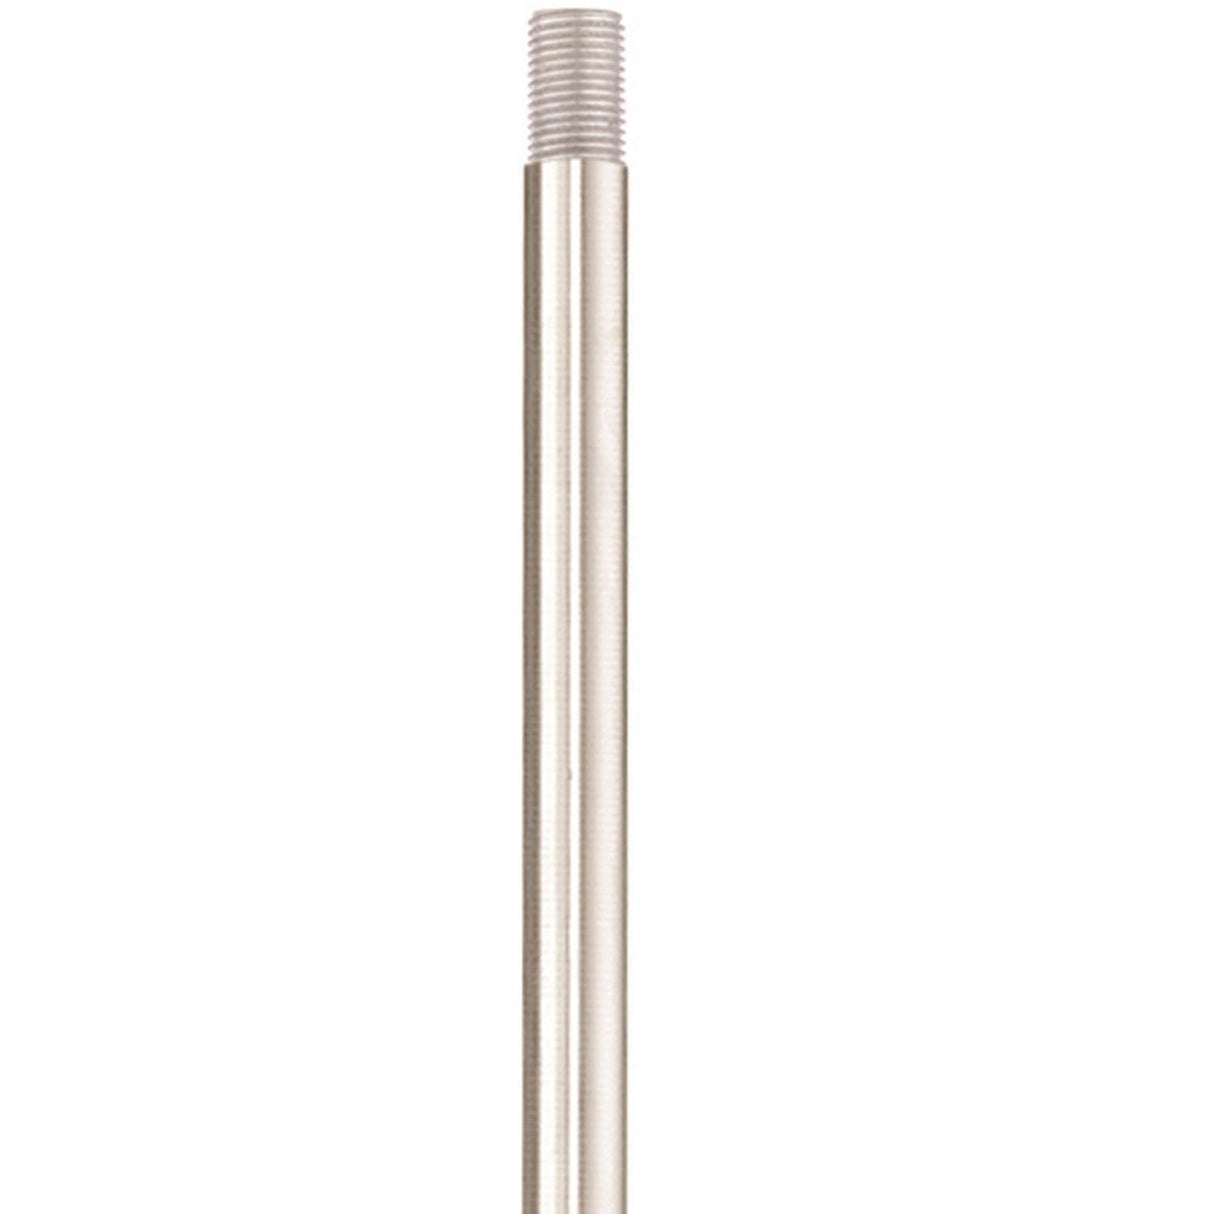 Livex Lighting 56050-05 Transitional Extension Stem from Accessories Collection Finish, 12.00 inches, Polished Chrome